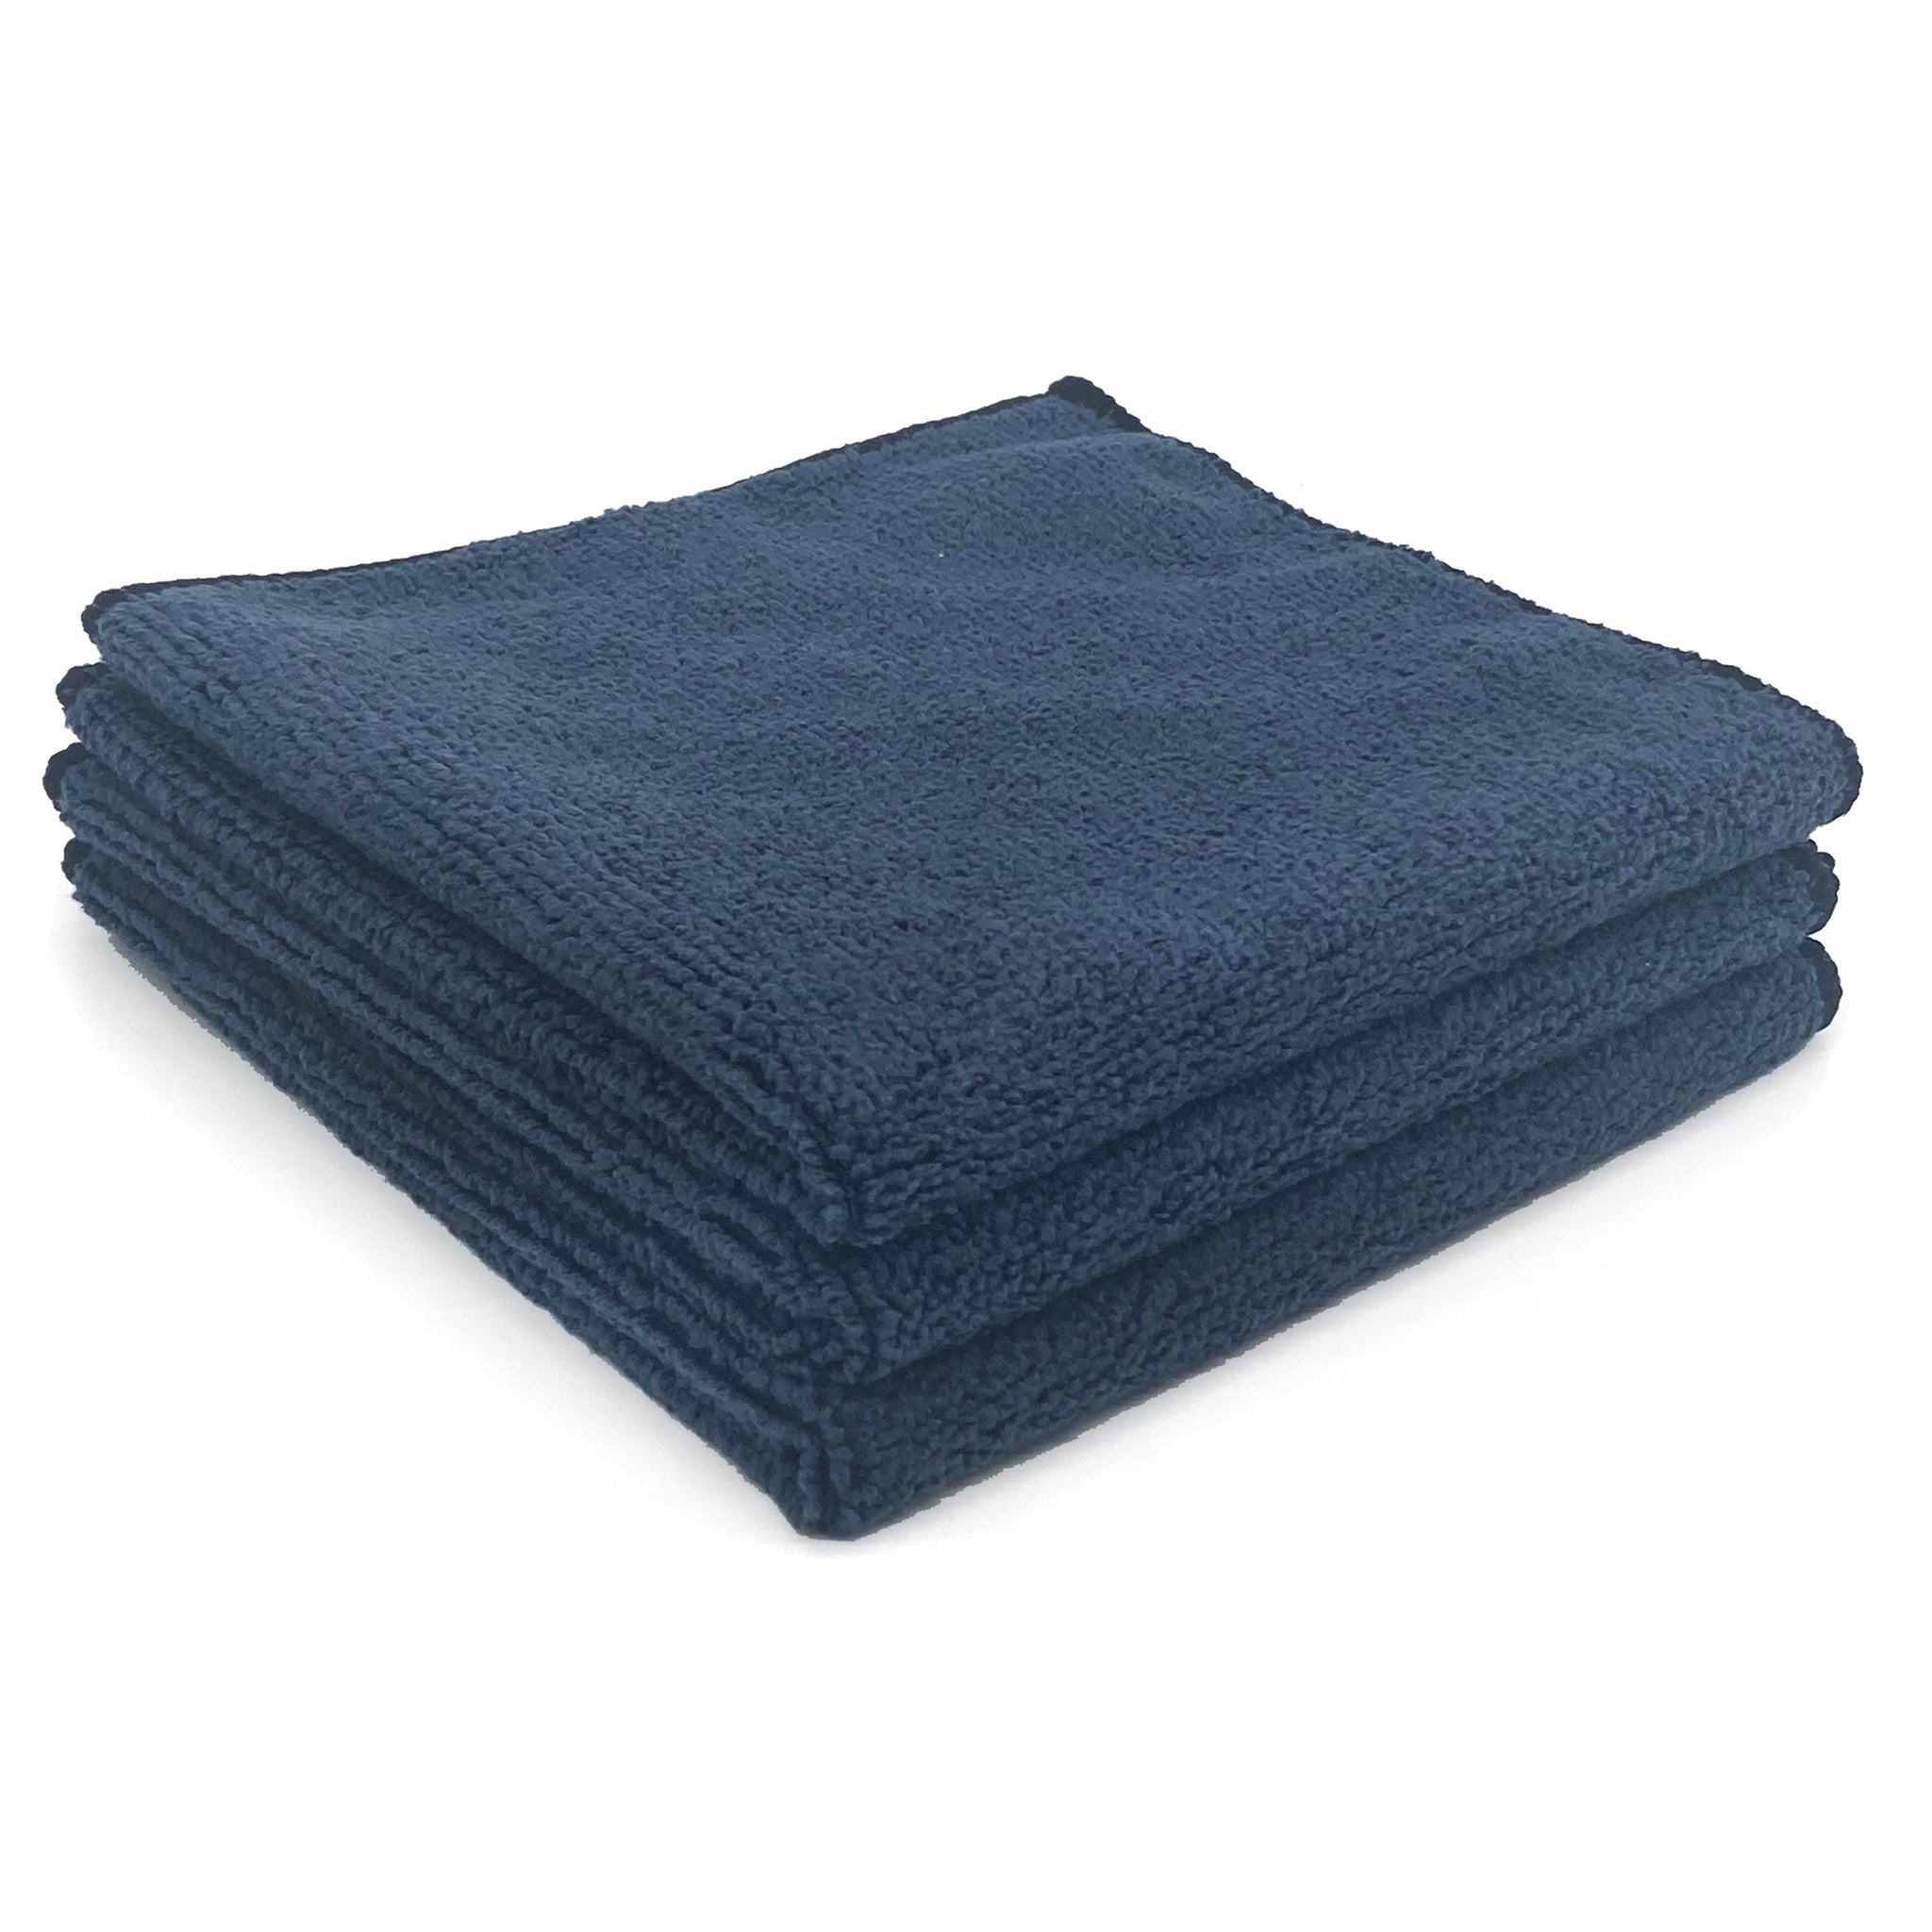 Microfiber Record Cleaning Towels (3 Pack)